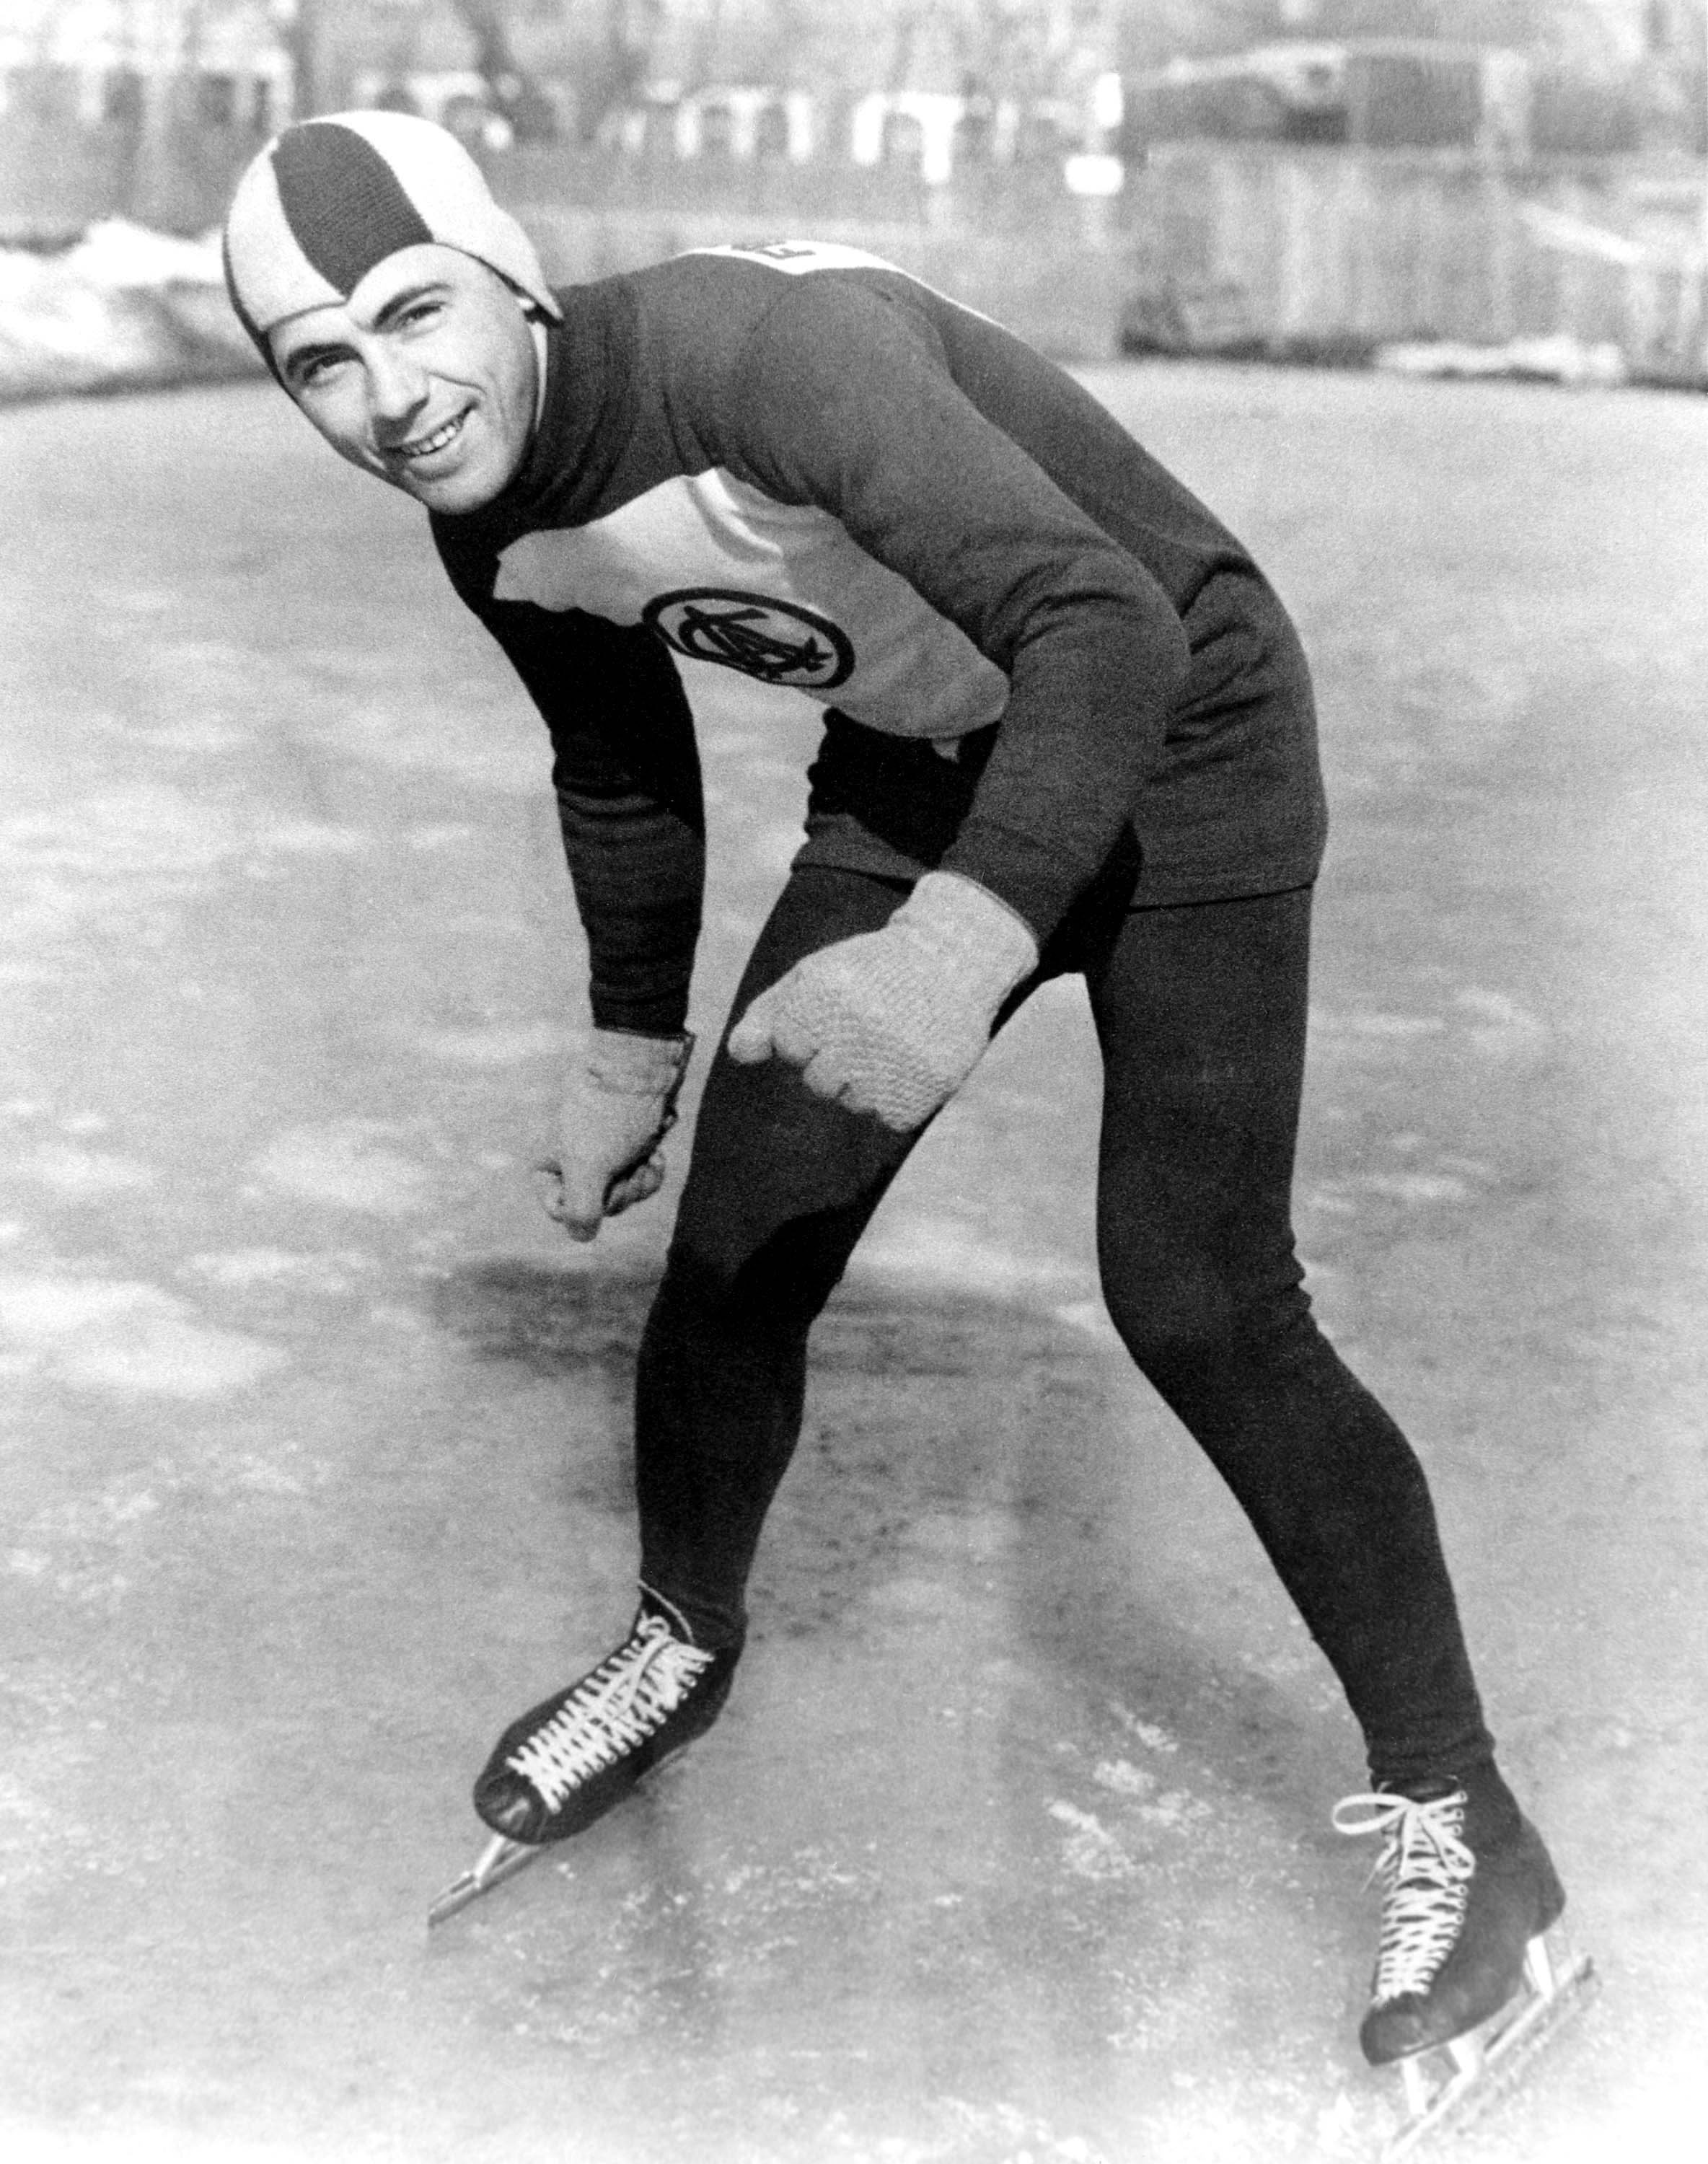 Canada's Frank Stack competes in the speed skating event at the Lake Placid 1932 Olympic Winter Games. Stack won the bronze medal in the 10,000m. (CP Photo/COC)